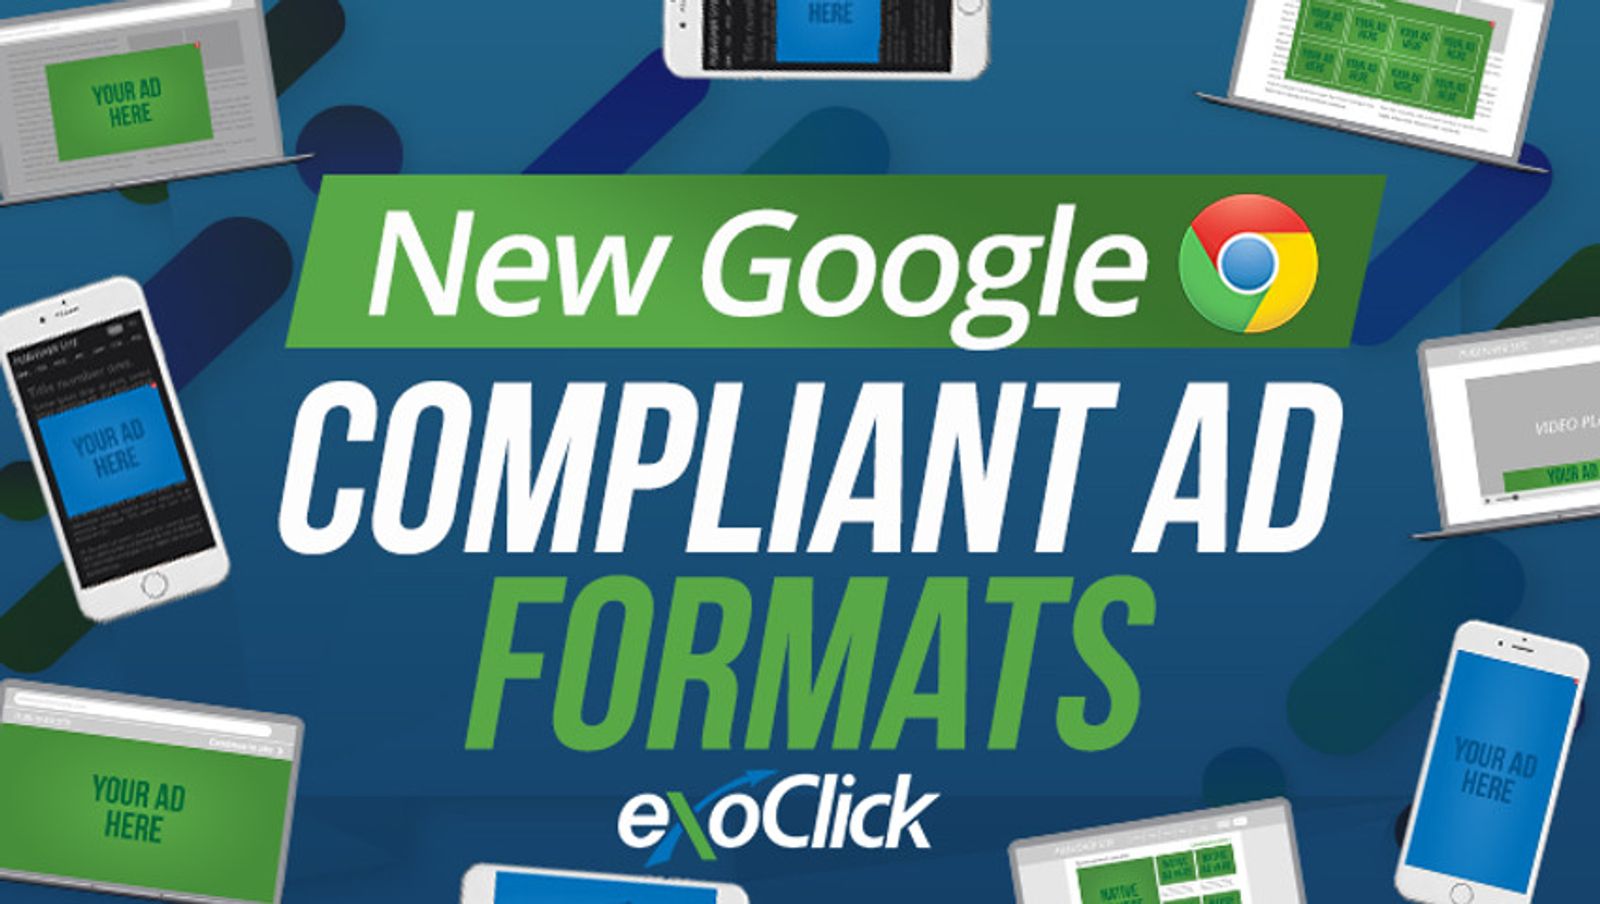 ExoClick Launches New Google Compliant Ad Formats